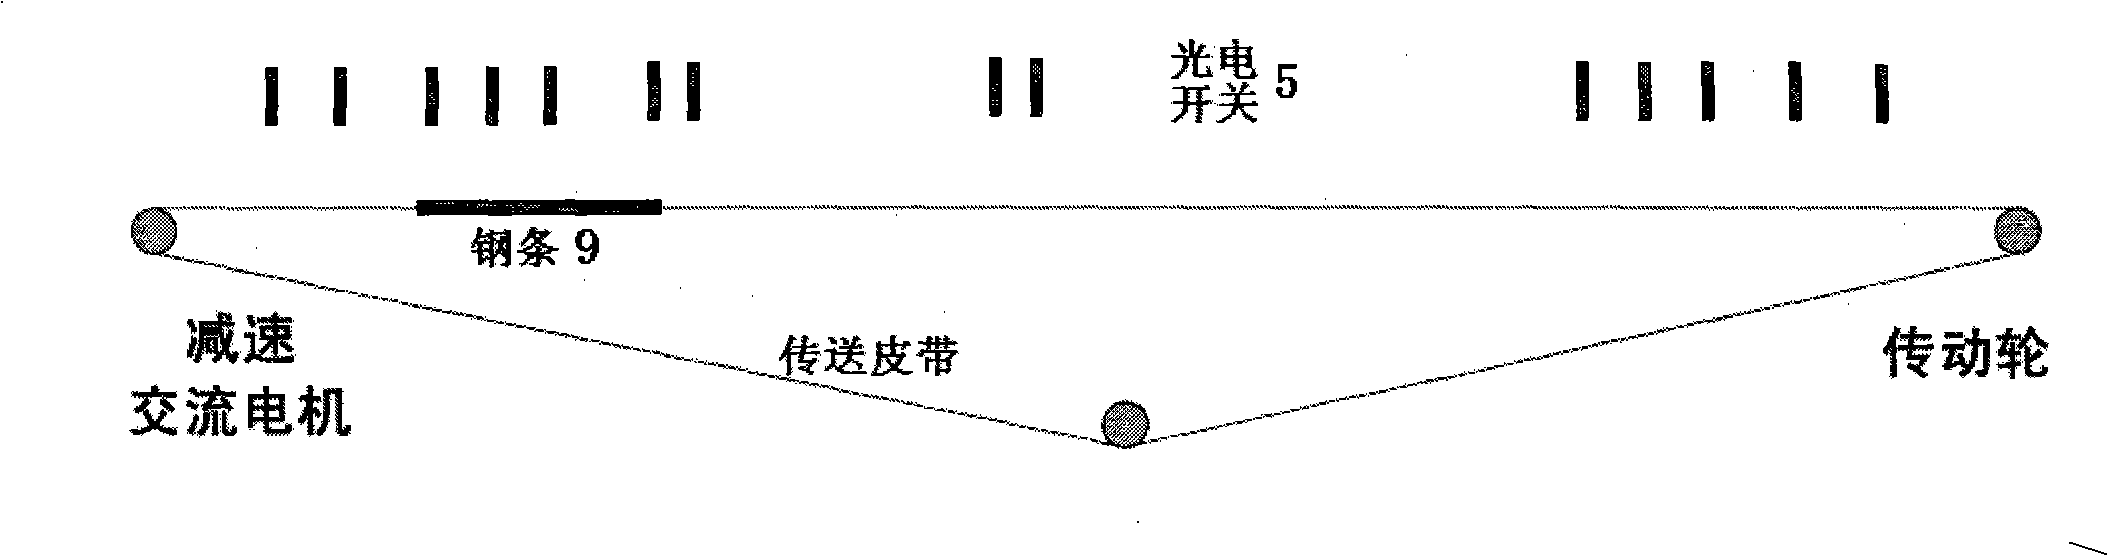 Steel plate cooling control analog system and method